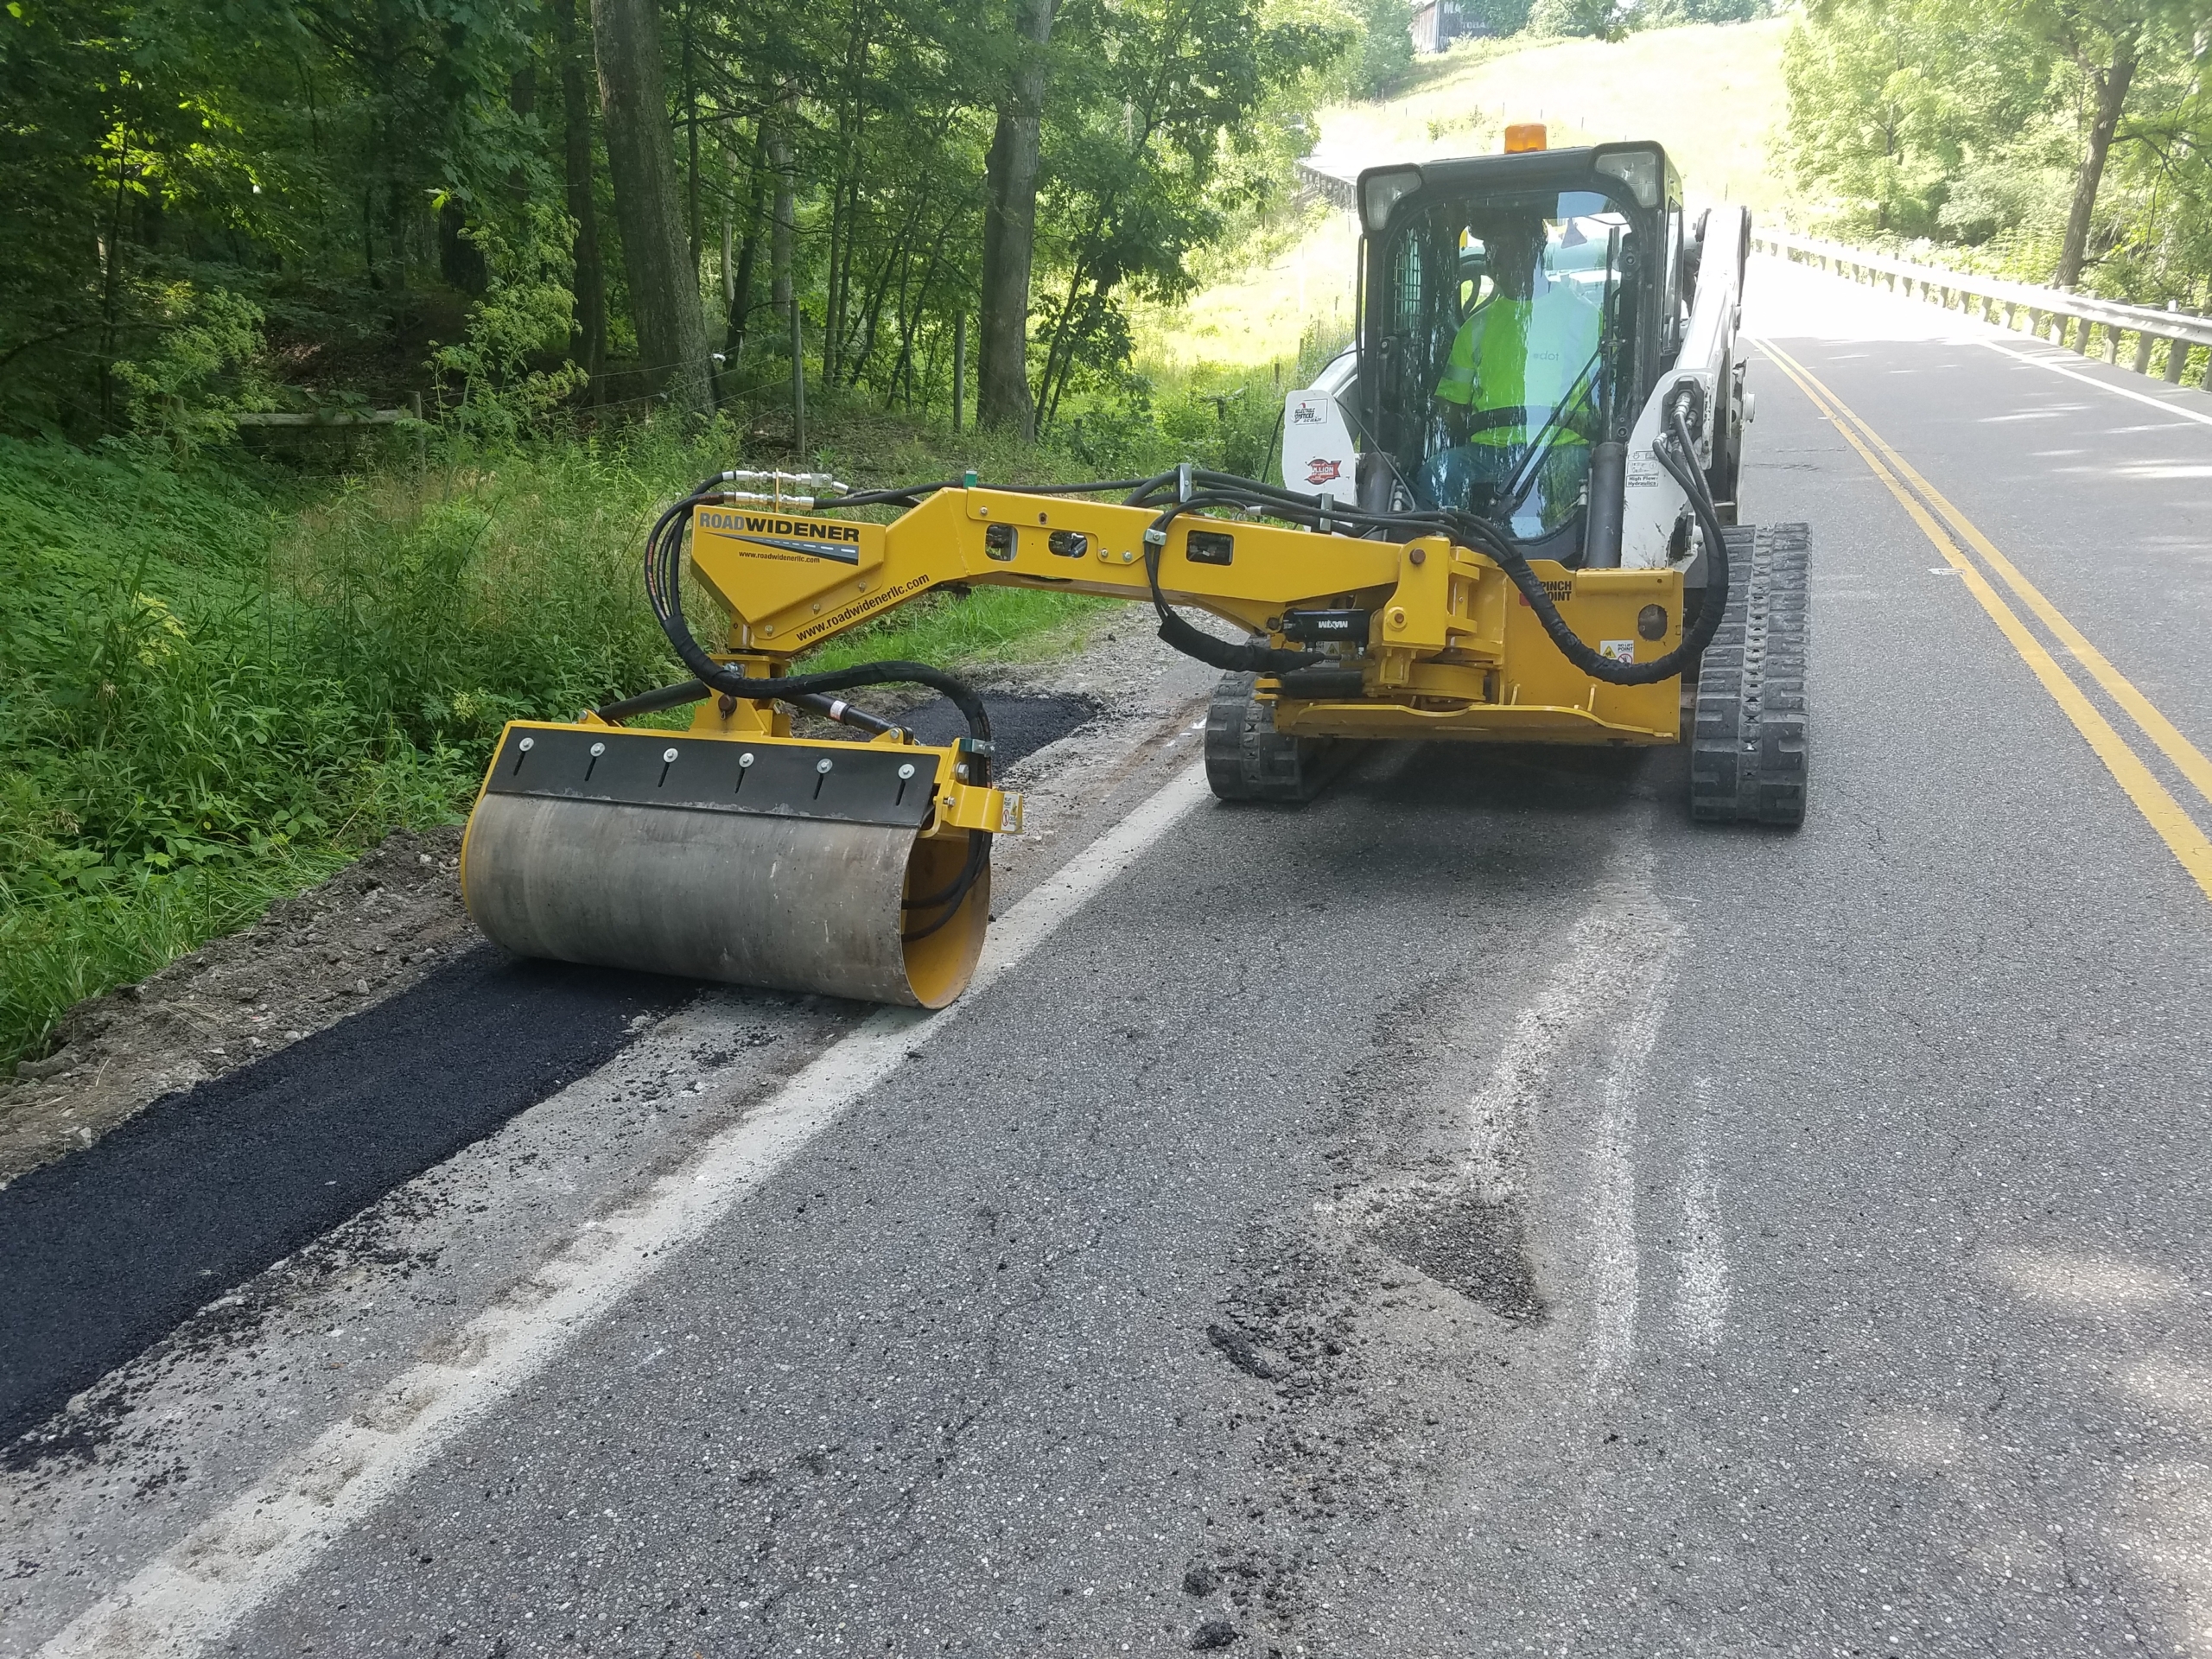 The Offset Vibratory Roller Attachment outperforms self-propelled compaction rollers in almost every aspect - eliminate the risk of rollovers while offering the same compaction pounds/cubic foot as traditional methods without the weight. Read more to see how you can take your next road repair project to the next level.